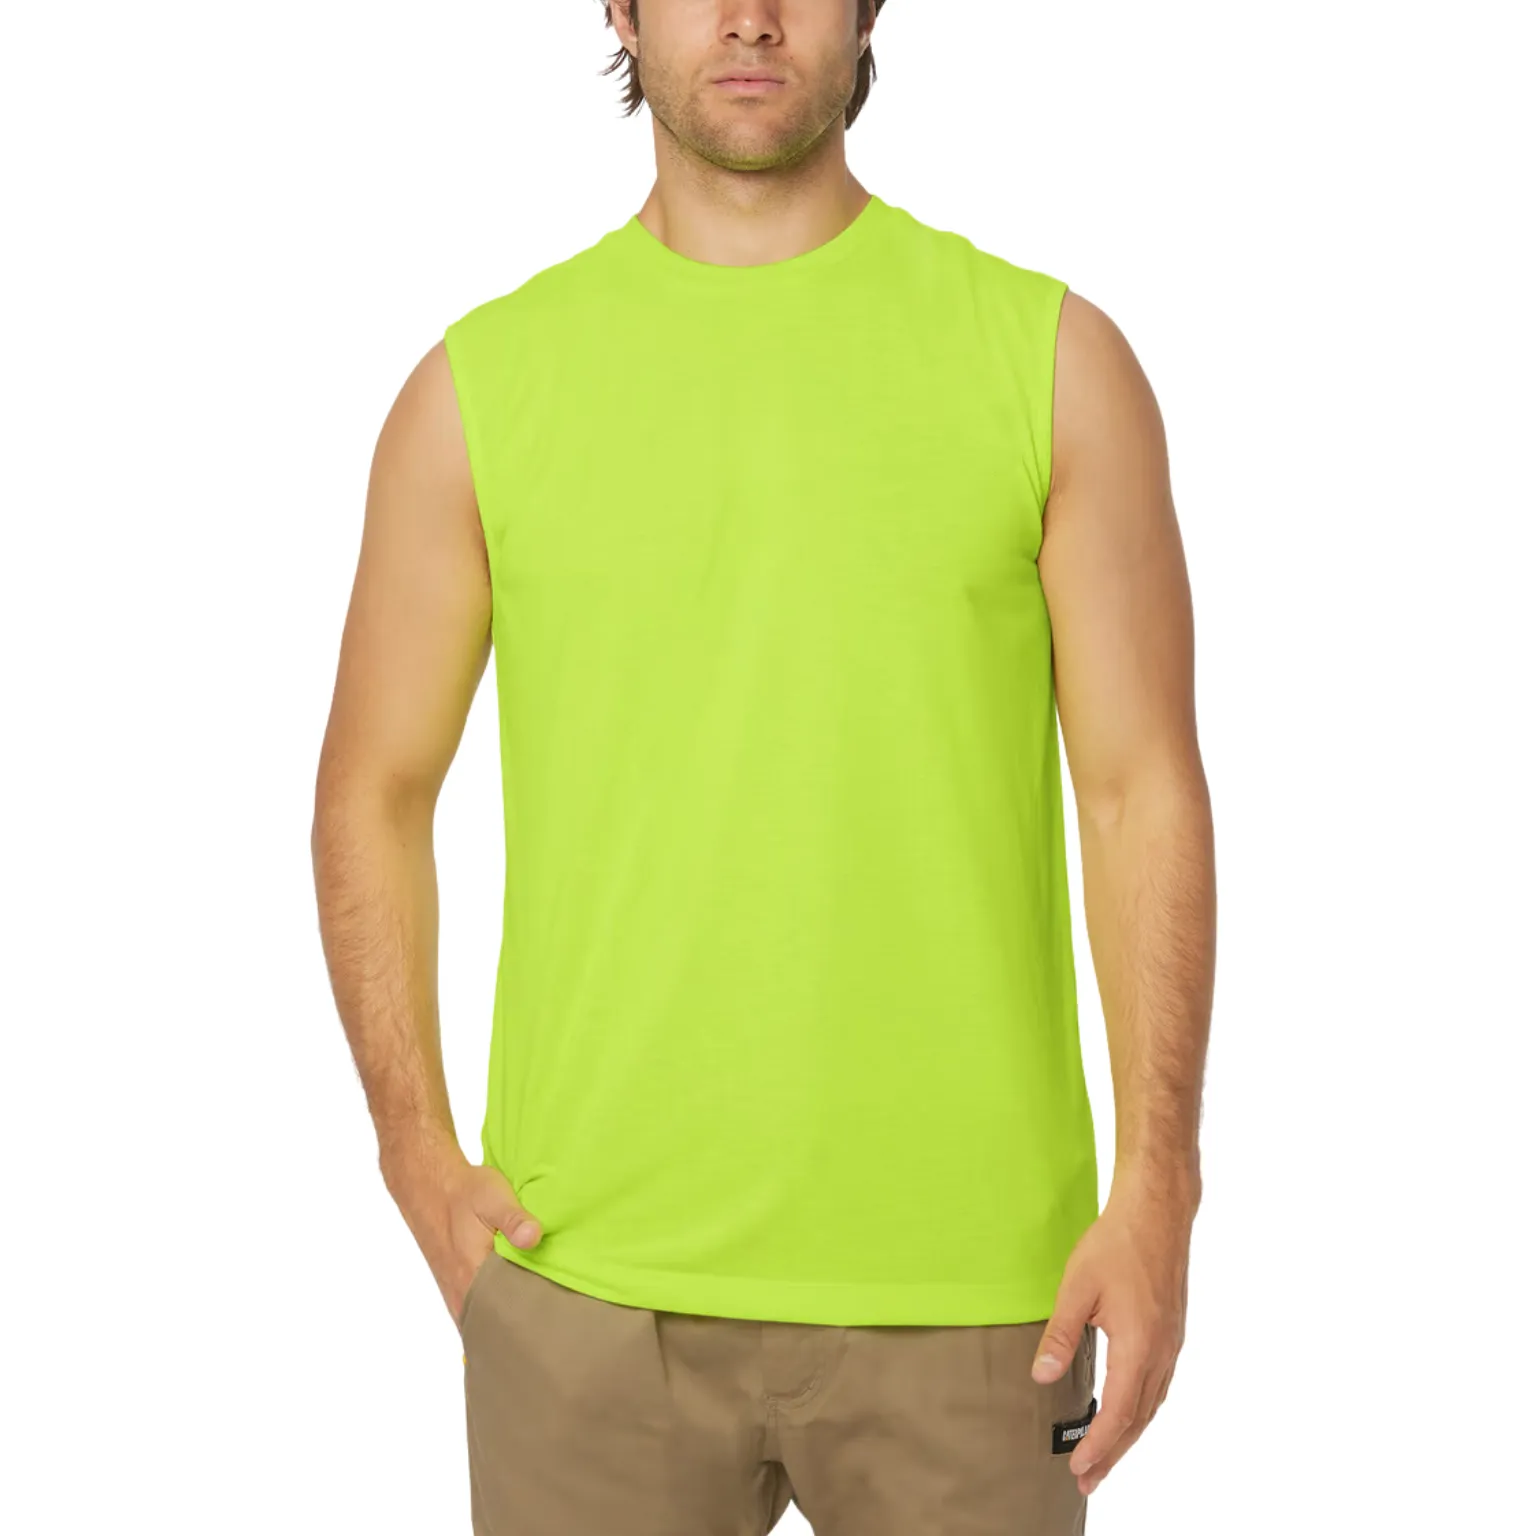 Sleeveless T-shirt manufacturing with trendy design